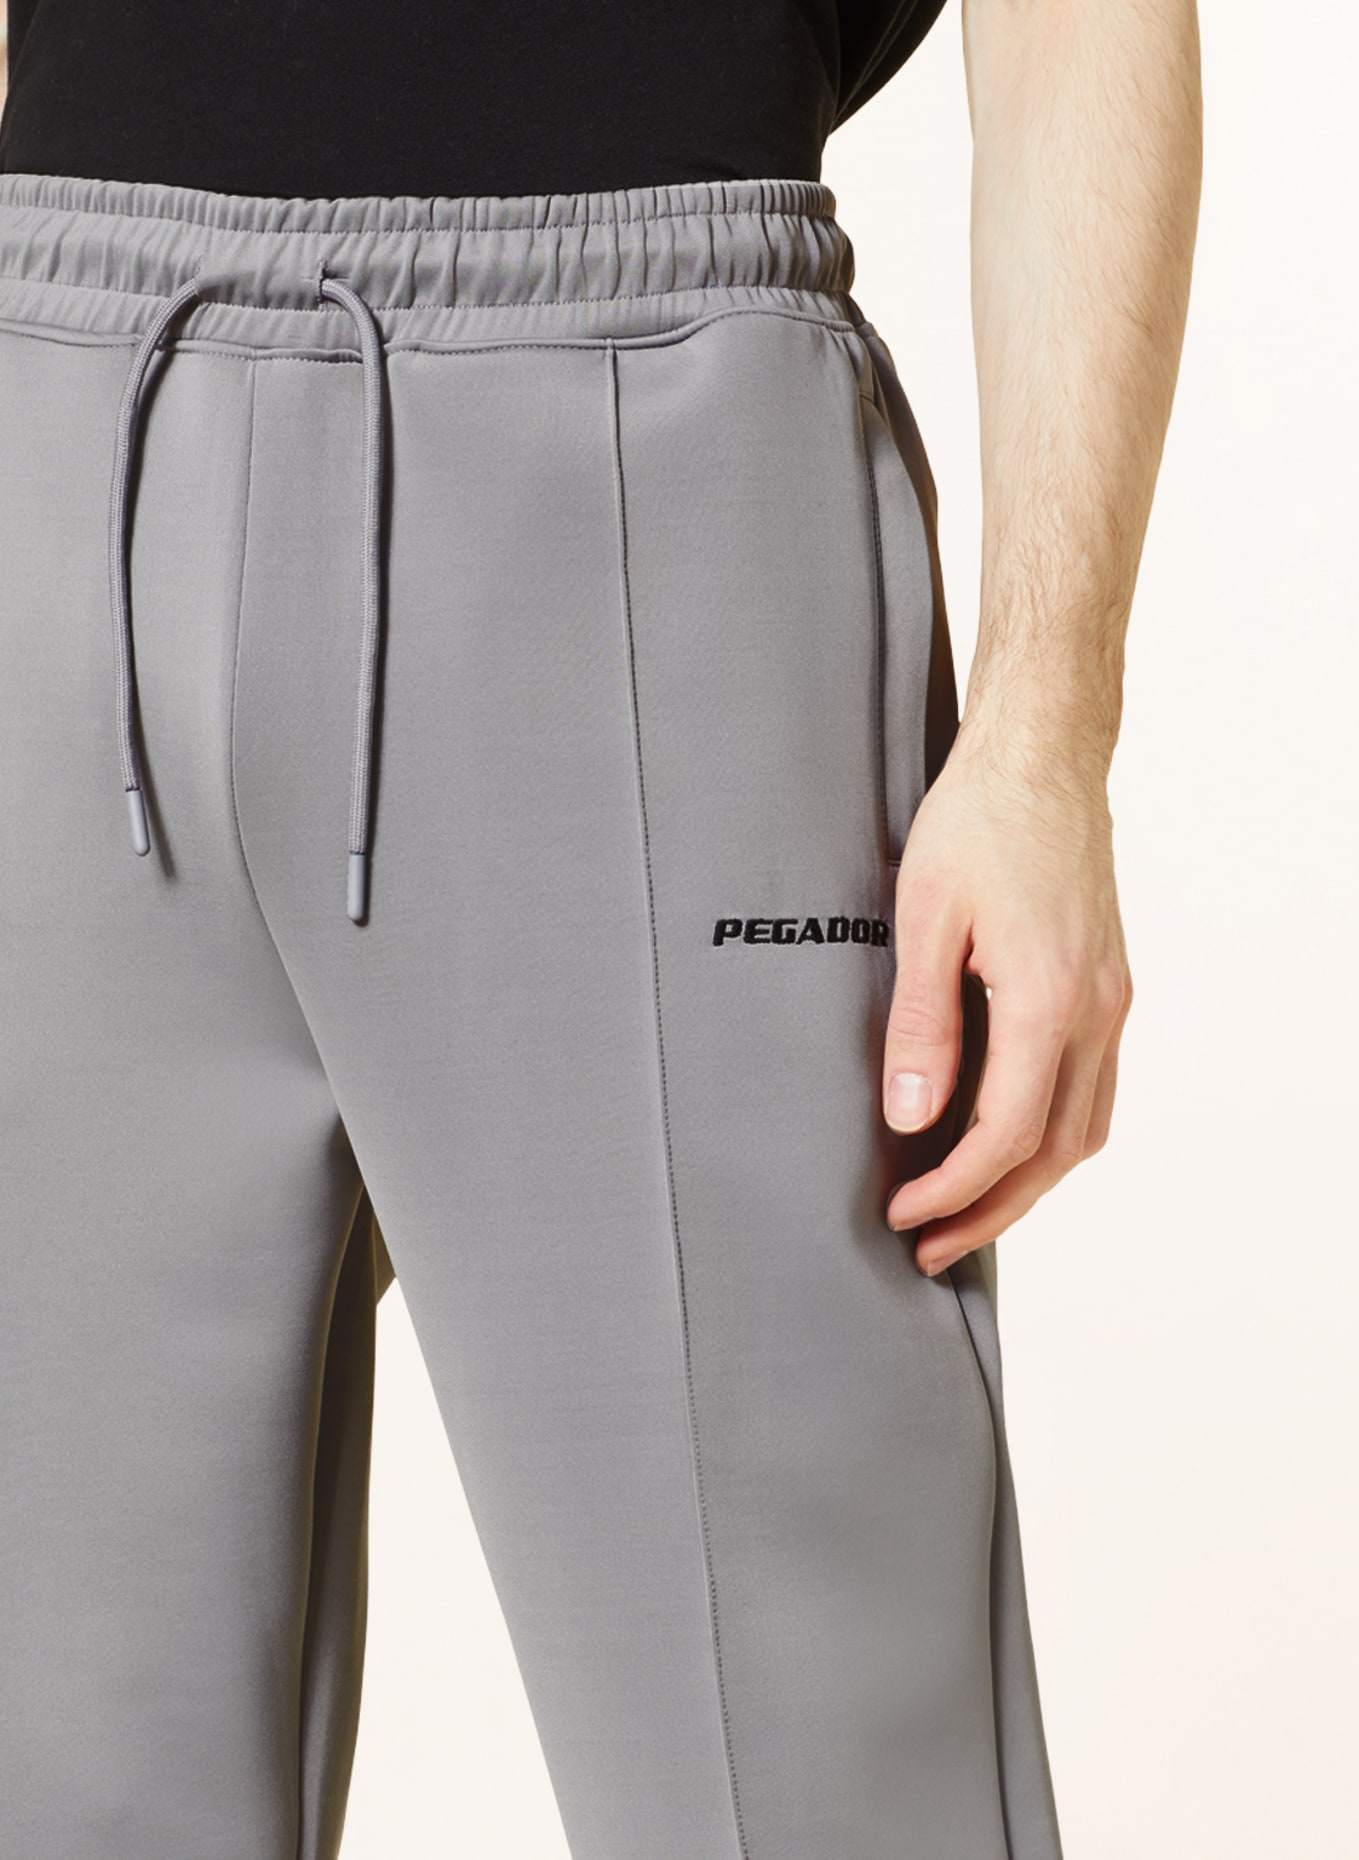 PEGADOR Pants in jogger style, Color: GRAY (Image 5)